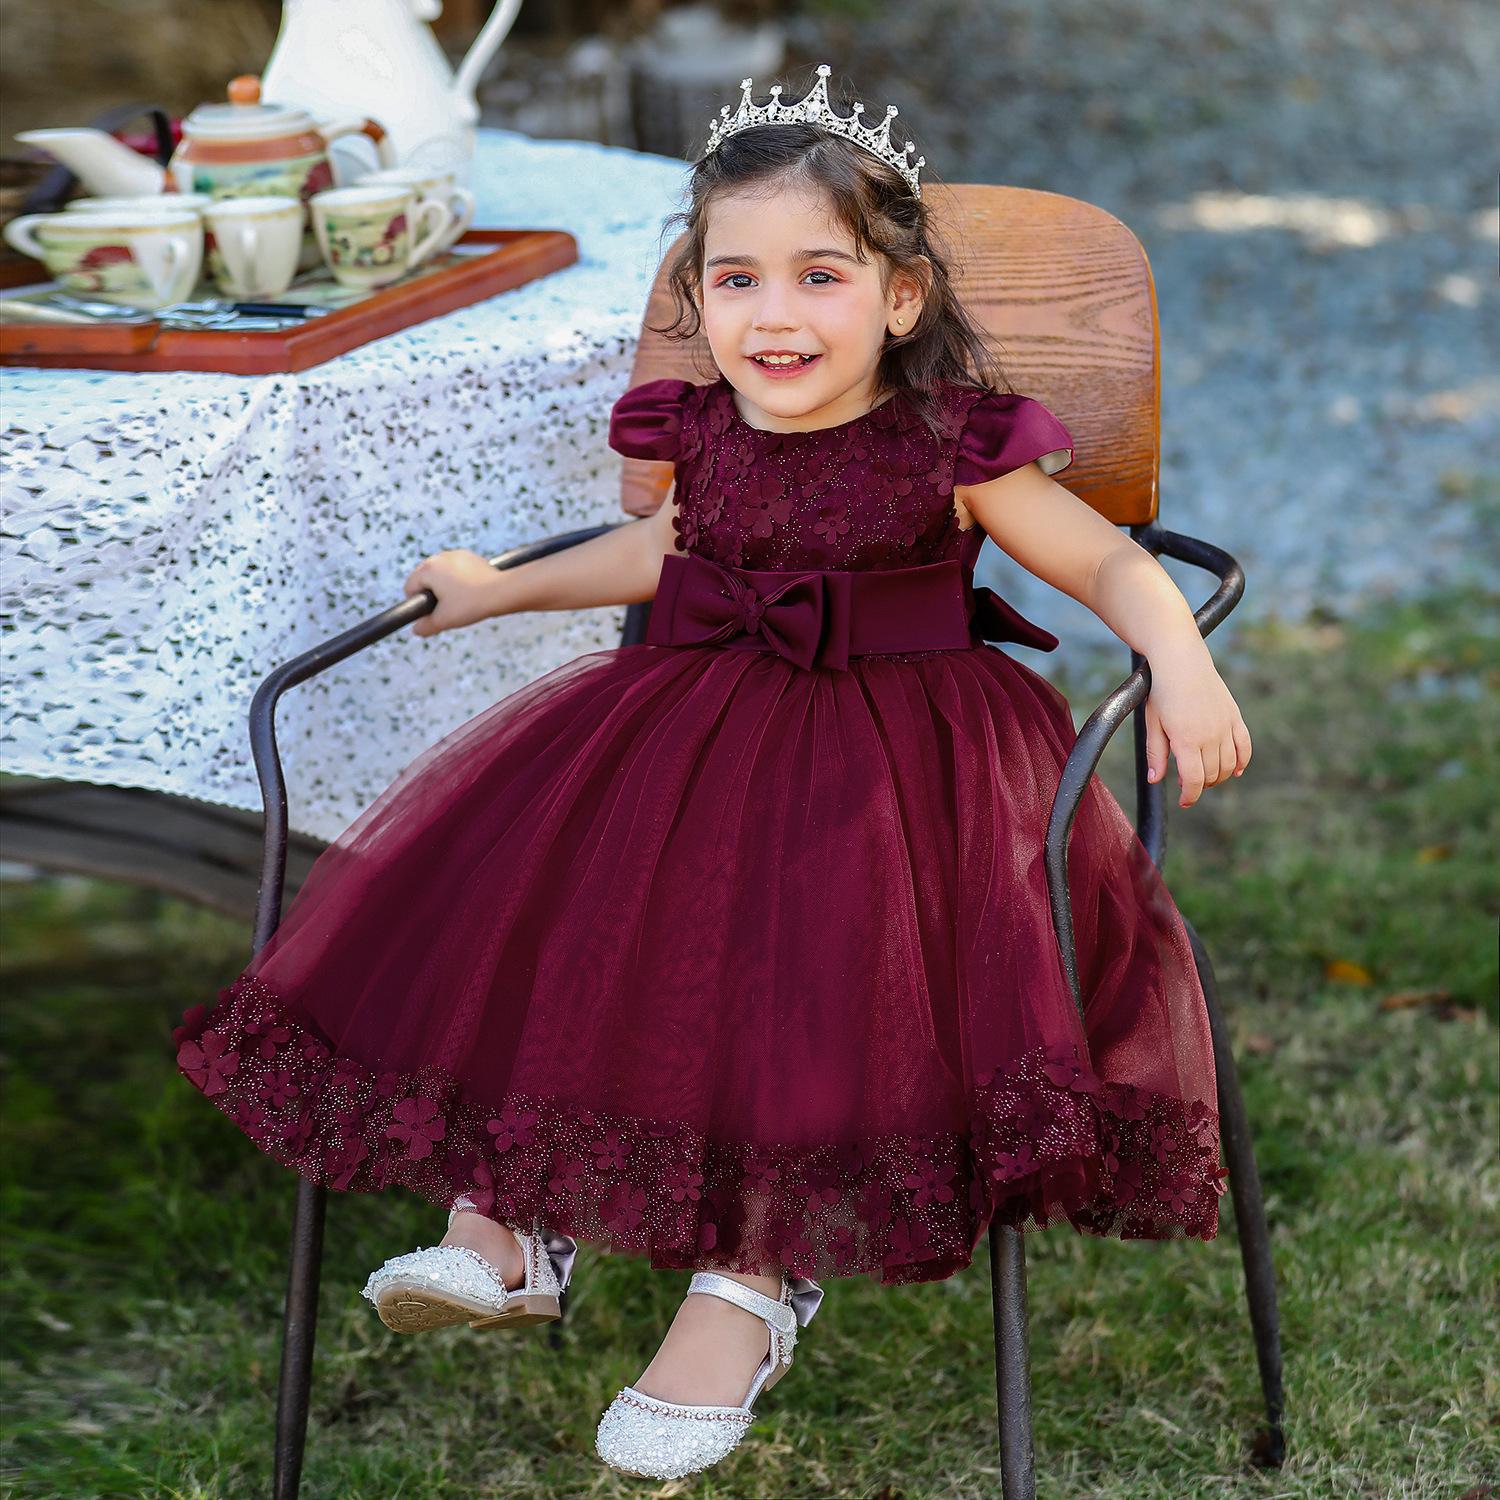 Baby Dress Clothing CO.Ltd Toddler Big Bow Baby Baptism Dress for Girls Children Clothe 1 Years Birthday Party Wedding Princess Dresses Evening Gown